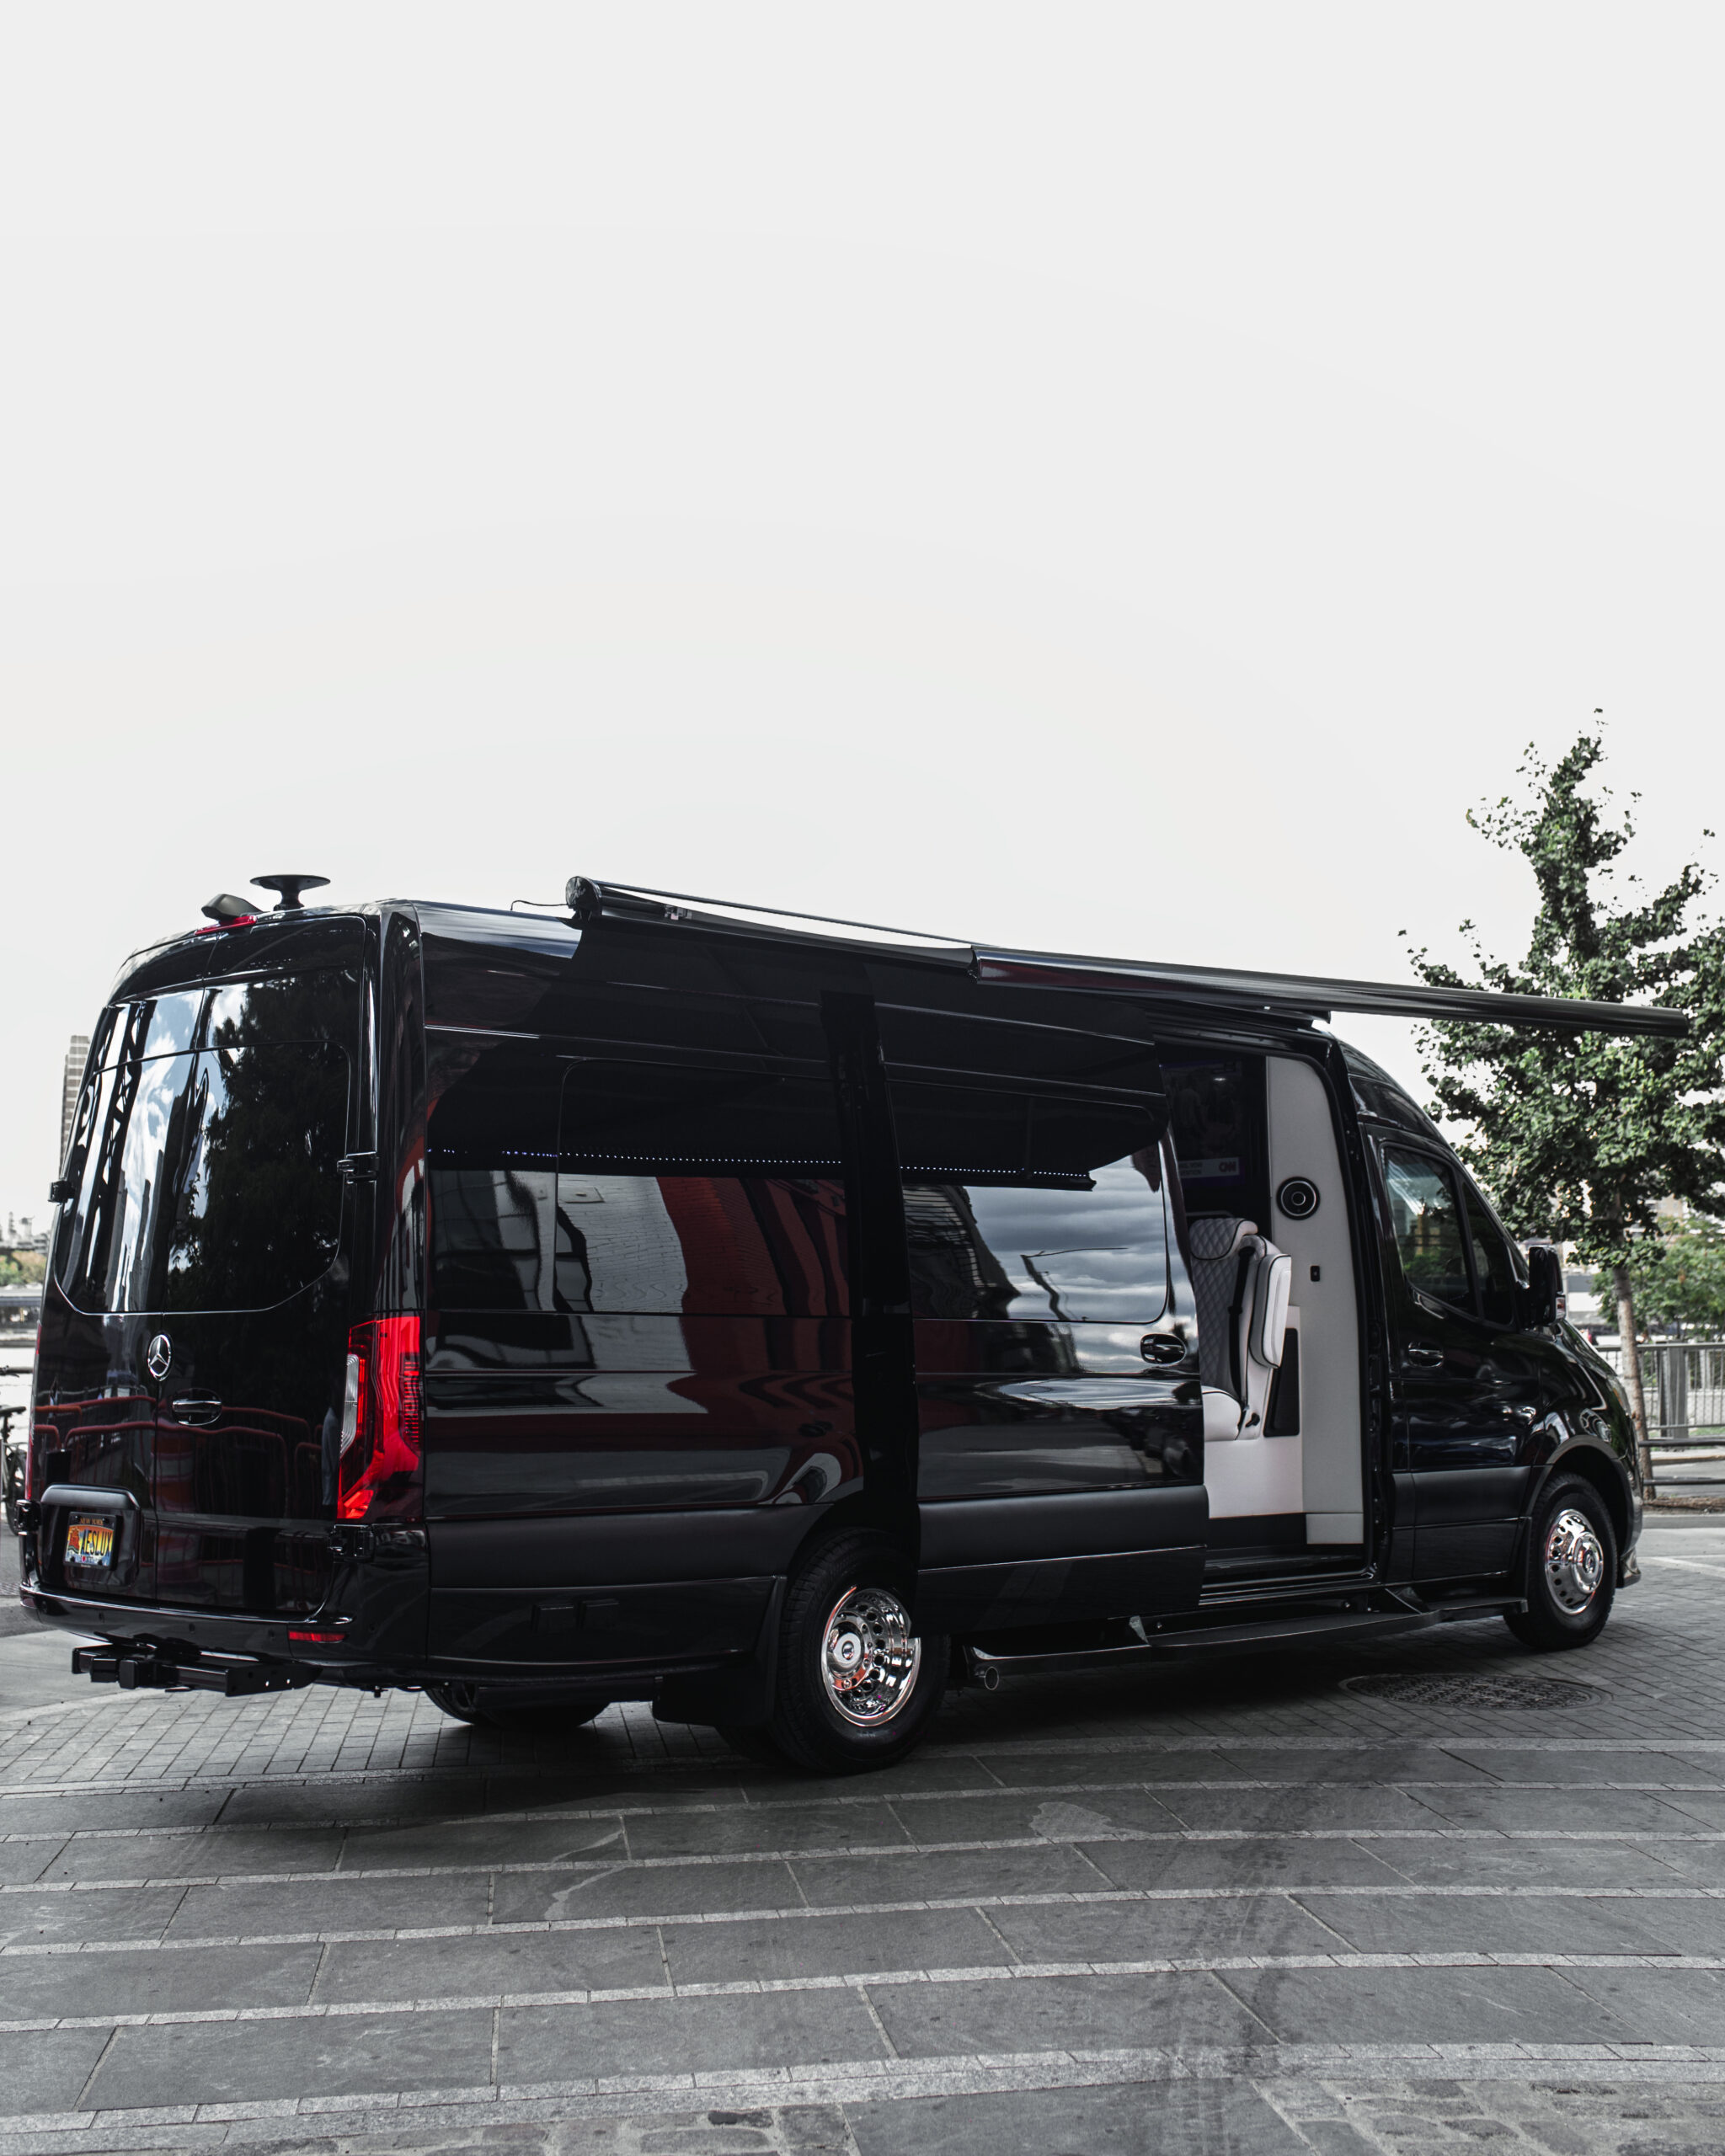 Sprinter Services for Every Occasion​